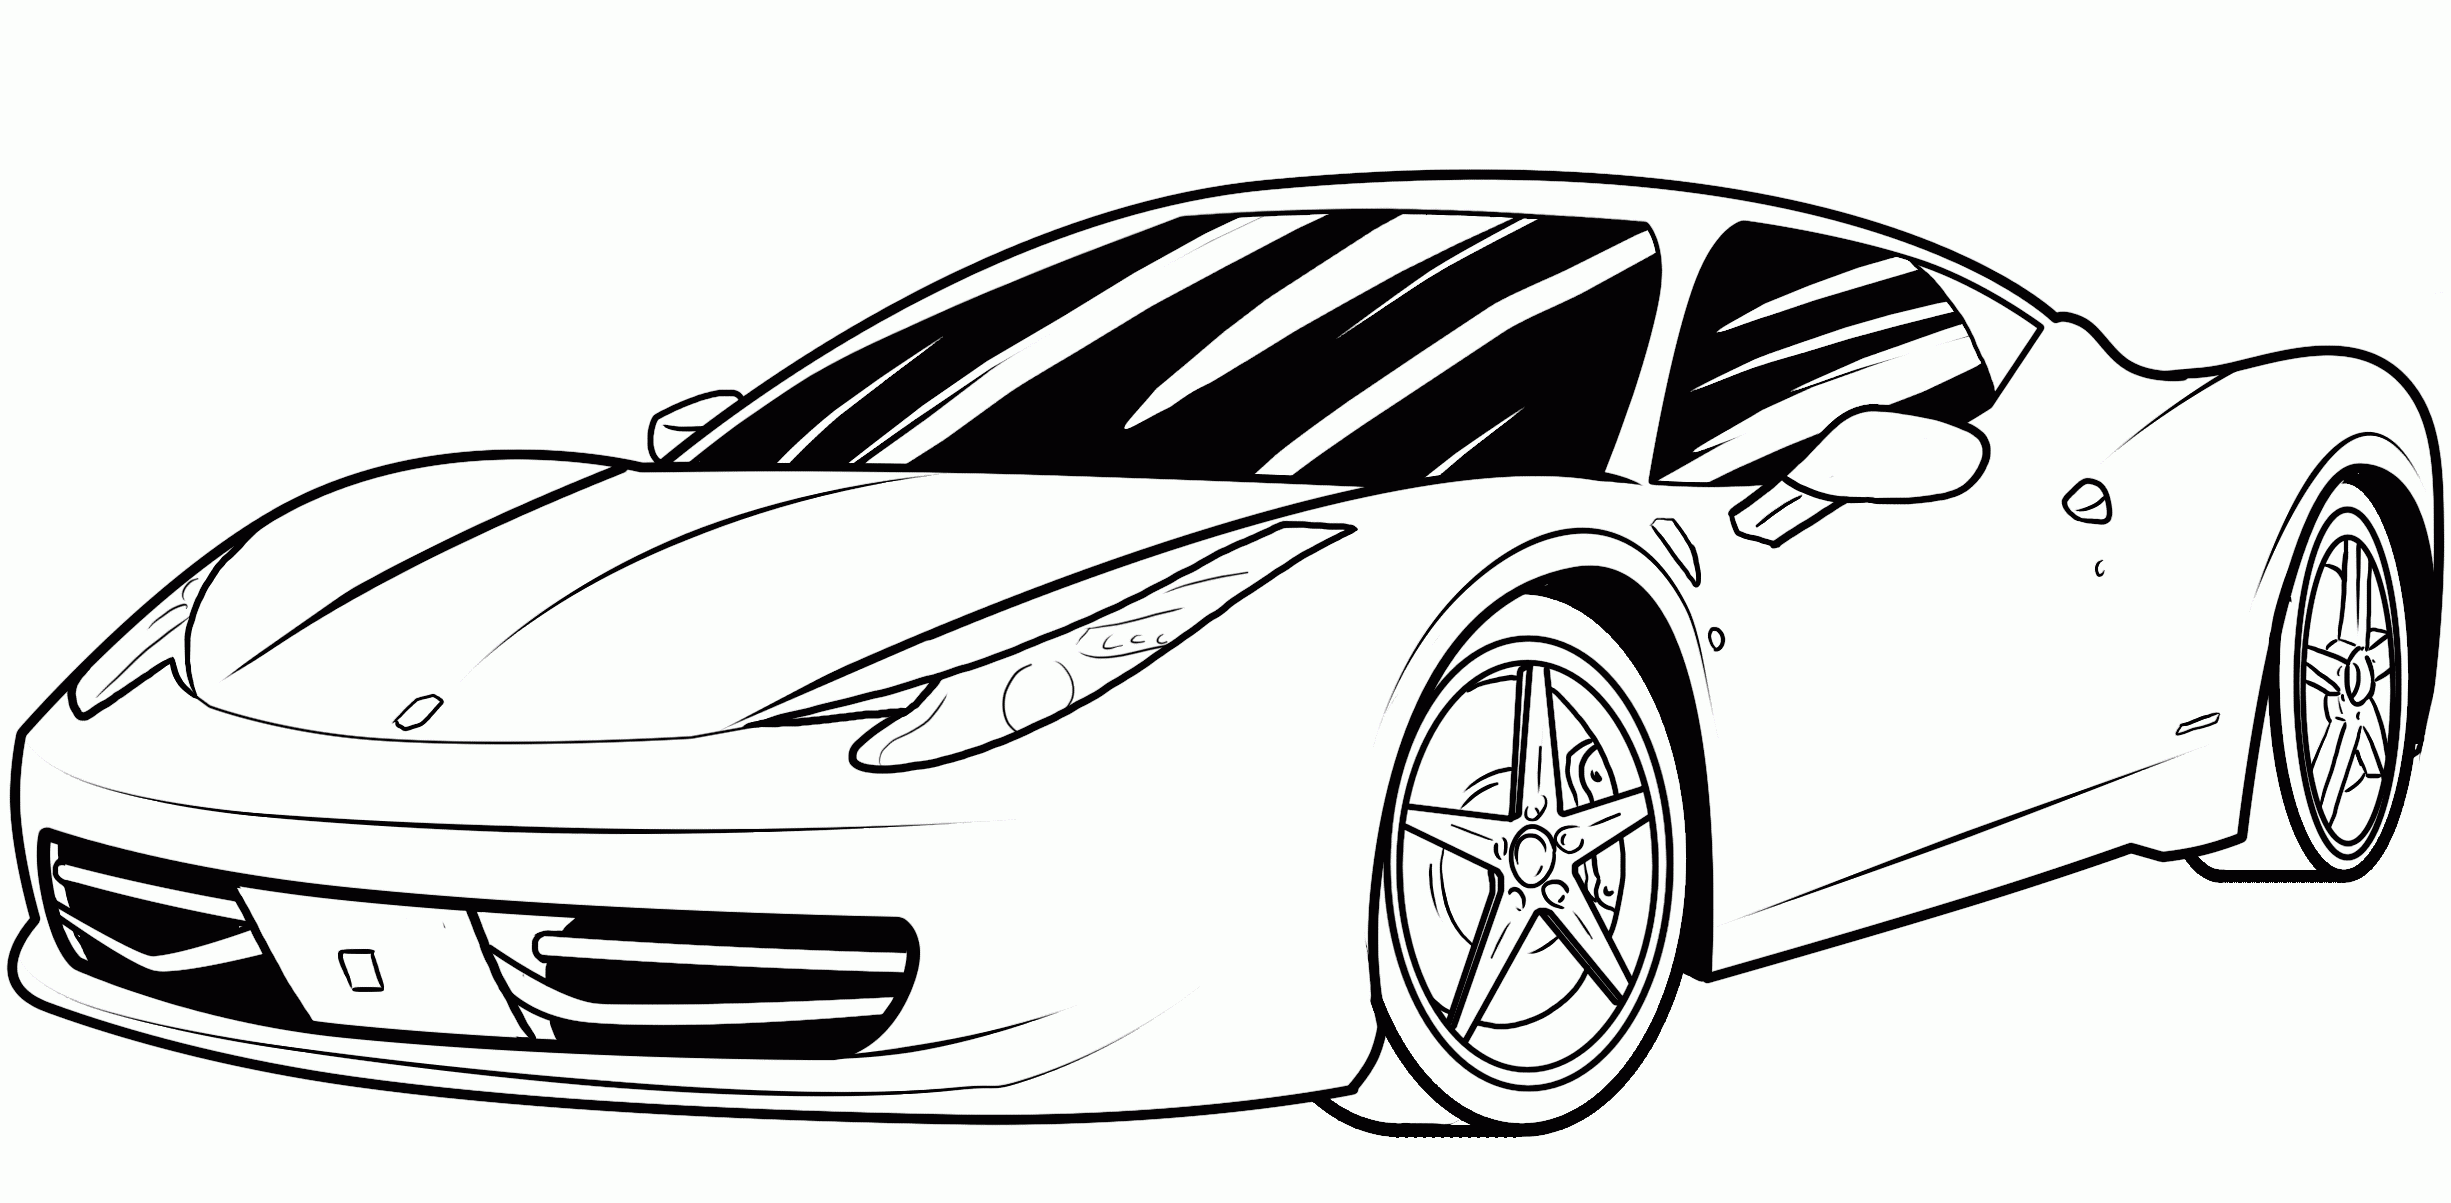 Car With Spoiler Coloring Page - Coloring Home